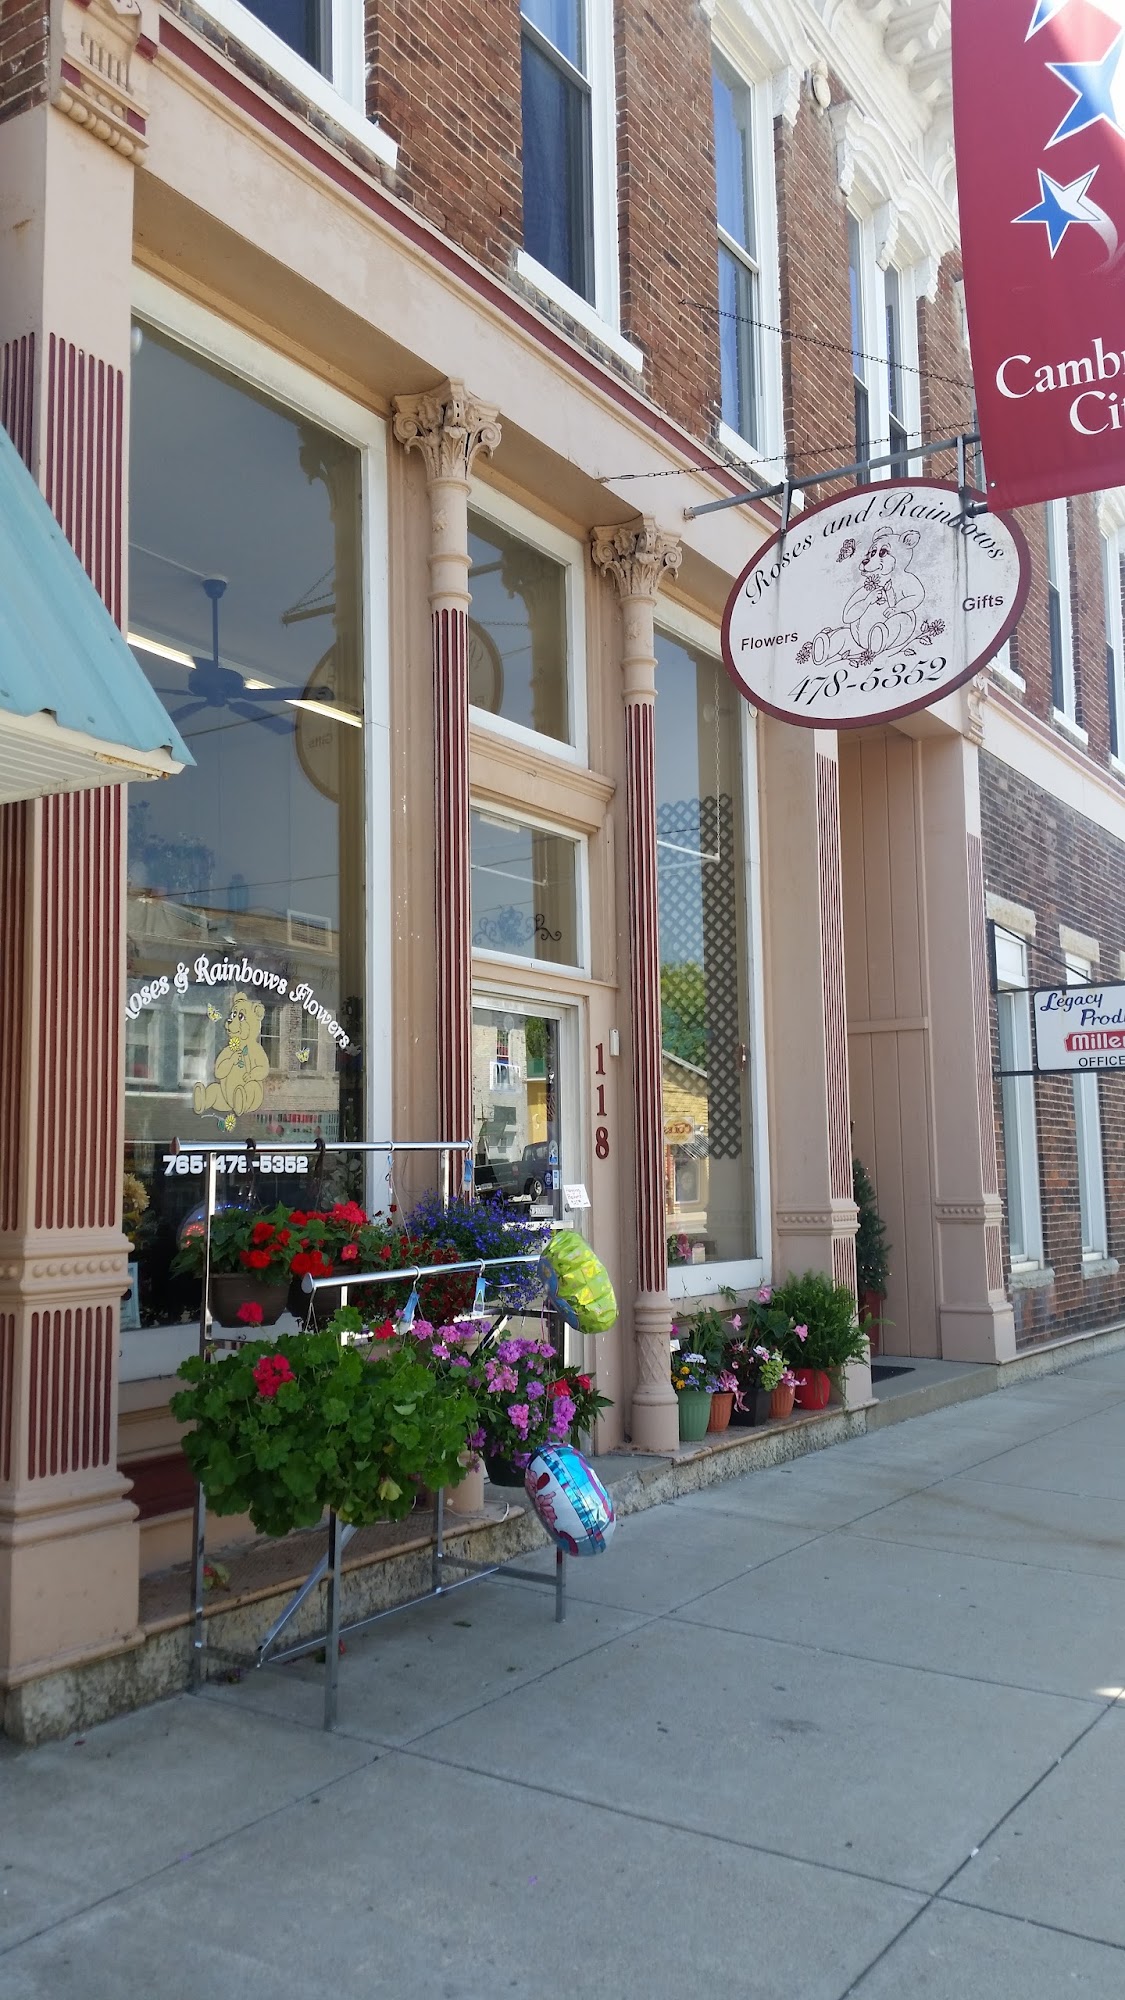 Roses & Rainbows Flowers Gifts 118 W Main St, Cambridge City Indiana 47327